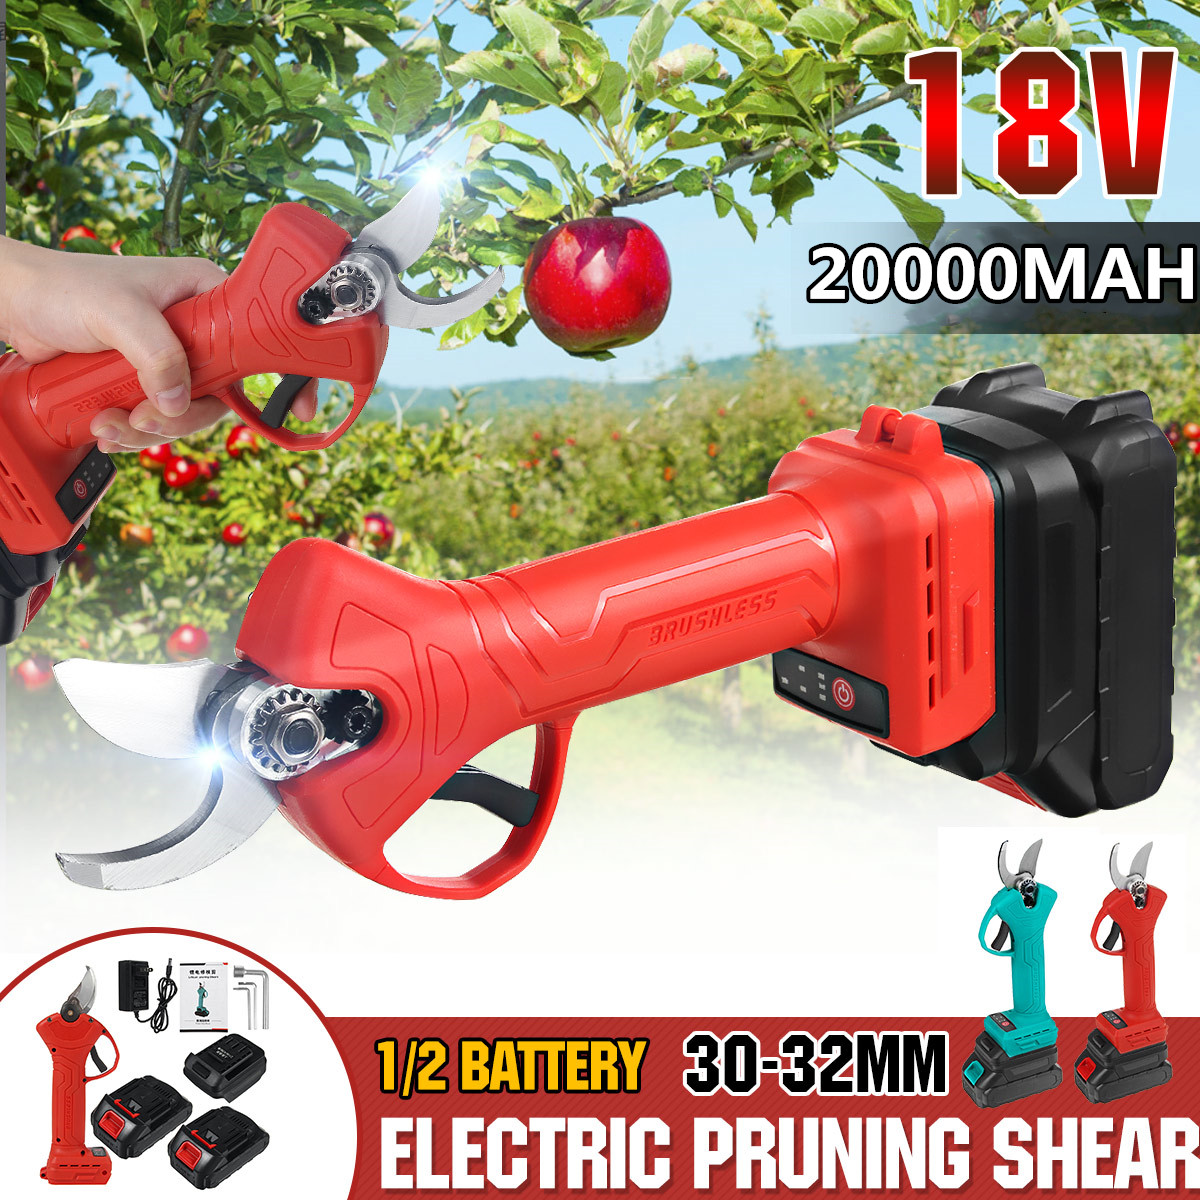 BLMIATKO-Wireless-Electric-Pruning-Shears-Scissors-Branches-Cutter-W-1-or-2pcs-Battery-Gardening-Too-1879784-1